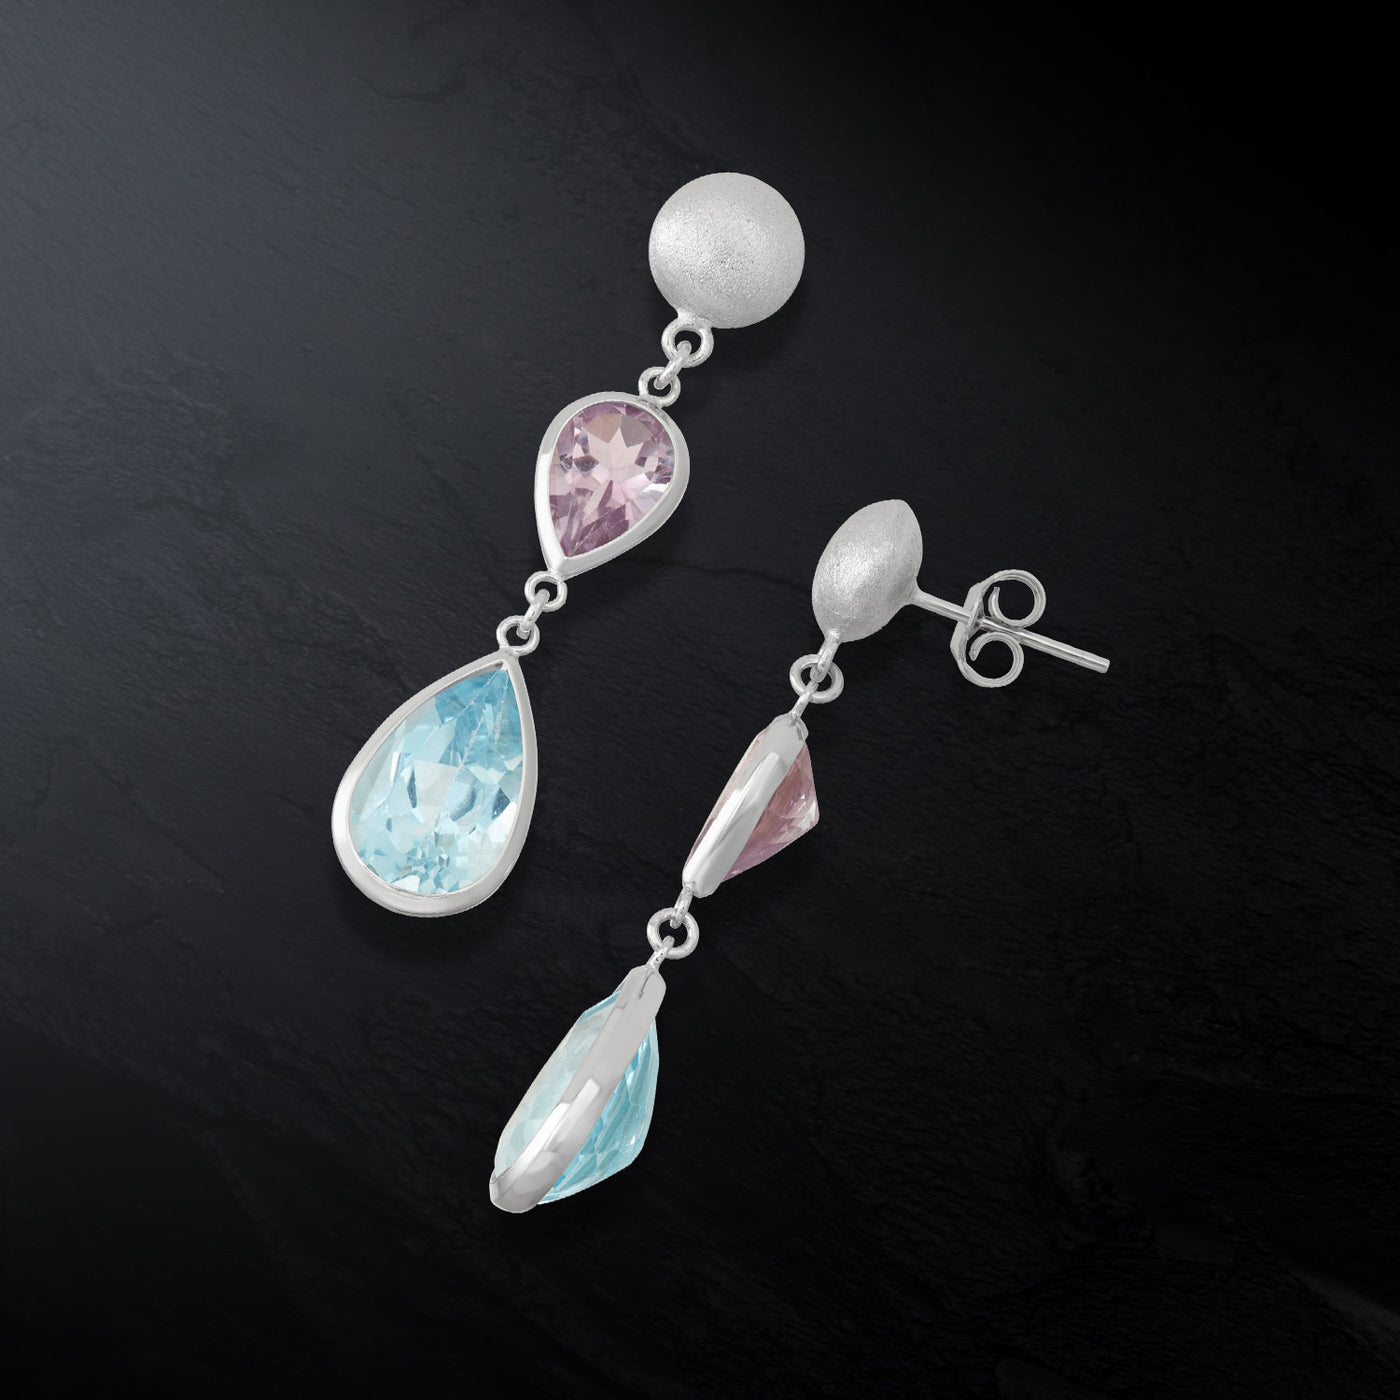 Sterling Silver Bead And Bezel Double Teardrop Drop Earring With Amethyst And Blue Topaz Gemstone